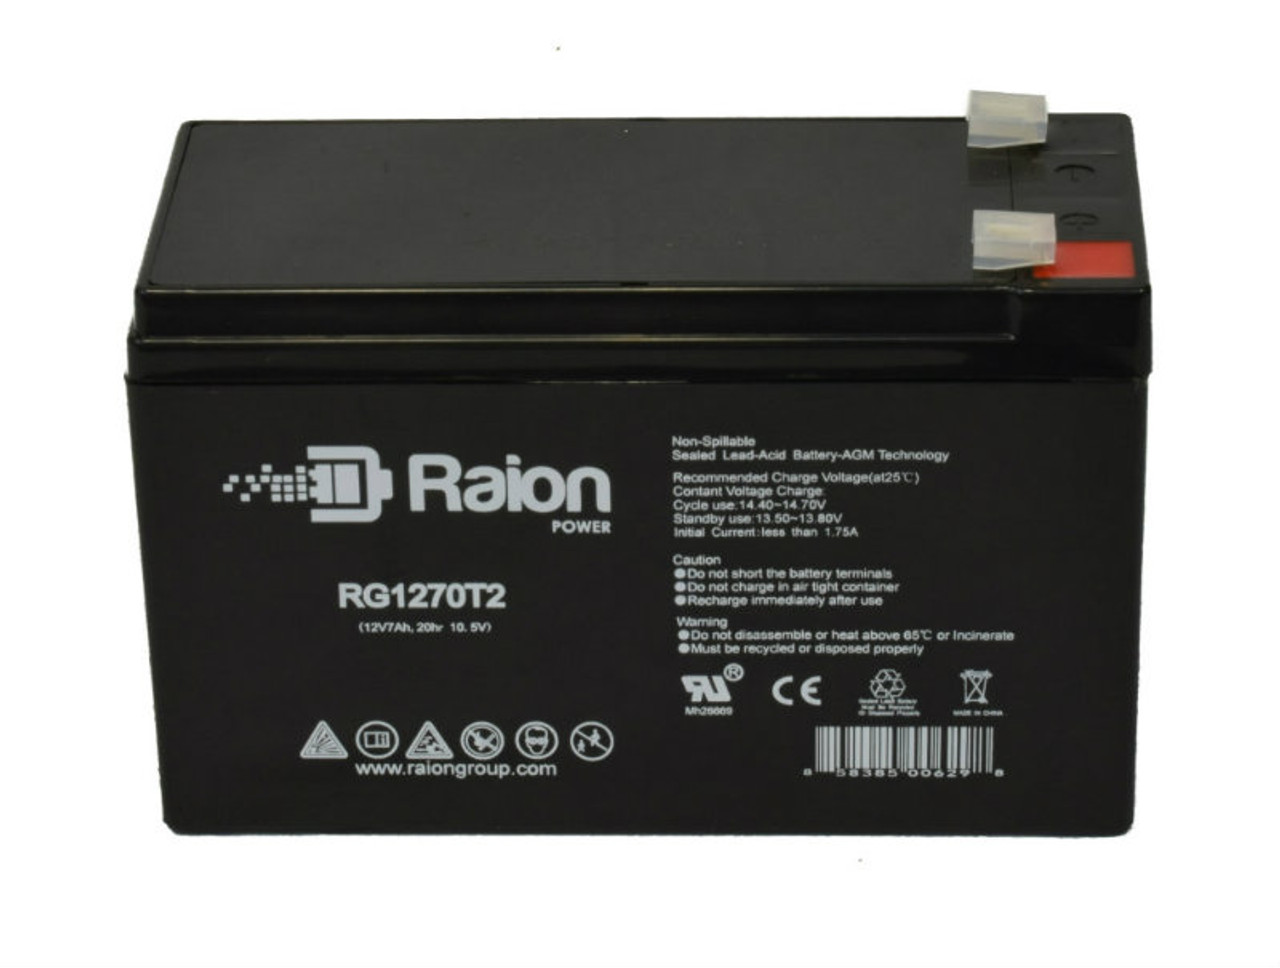 Raion Power RG1270T1 12V 7Ah Lead Acid Battery for Narco Narkomed Anesthesia 4